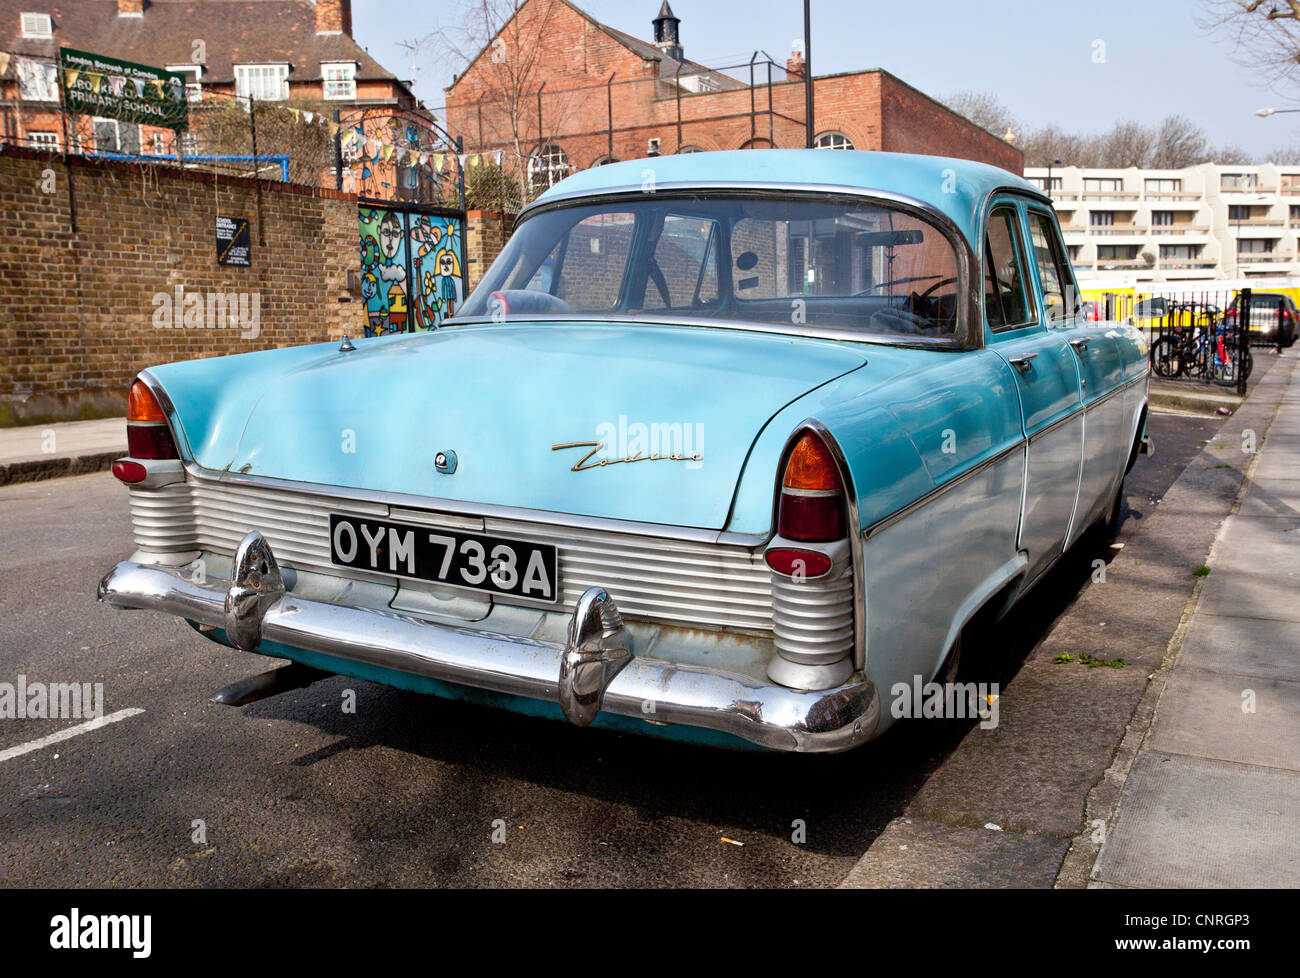 Three quarter rear view of a Ford Zephyr Zodiac car parked on the street, London, England, UK Stock Photo